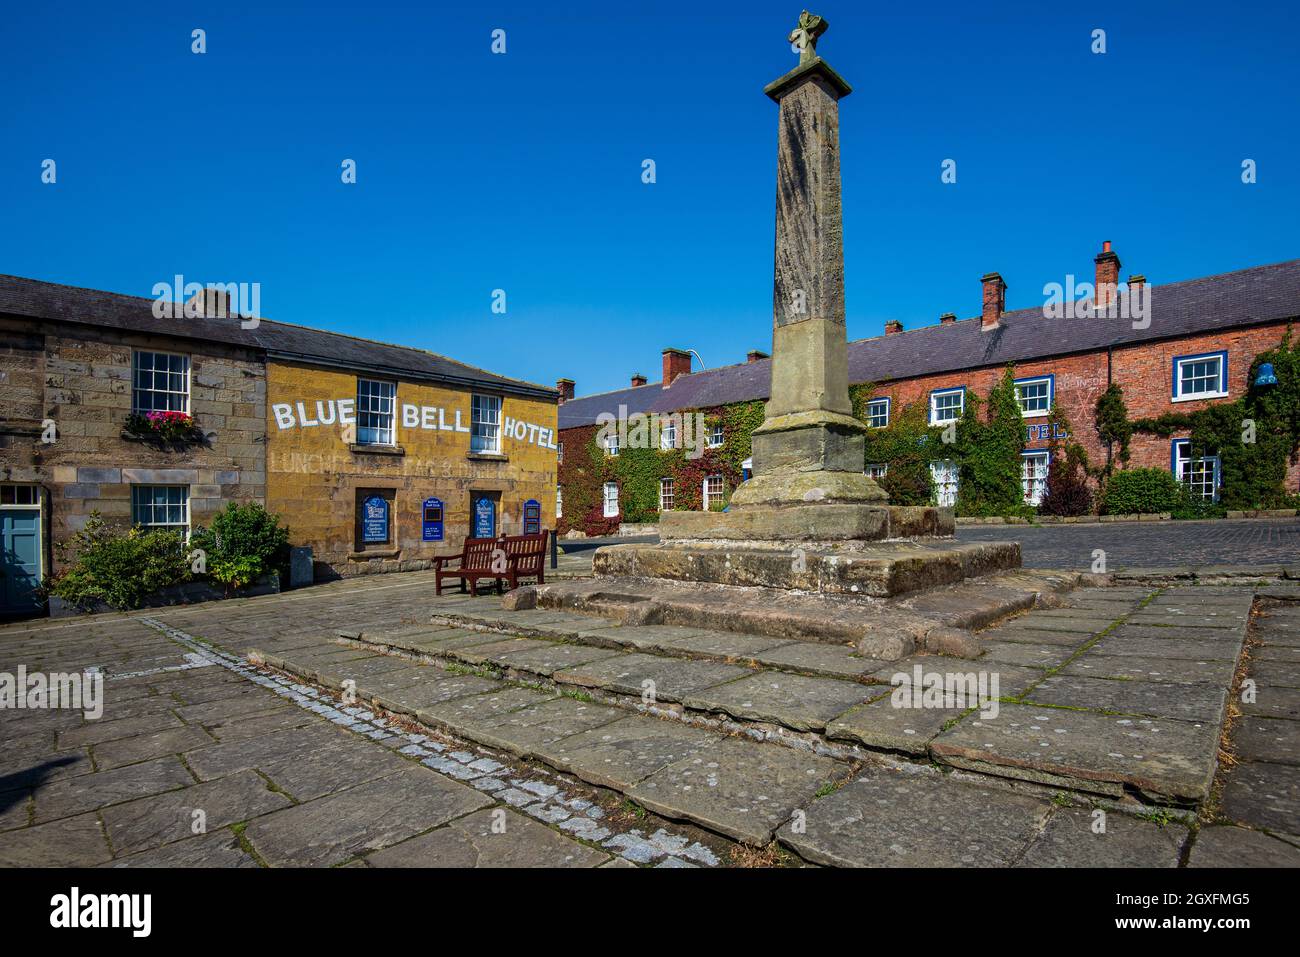 The market cross and Blue Bell Hotel, Belford, Northumberland, England, UK Stock Photo